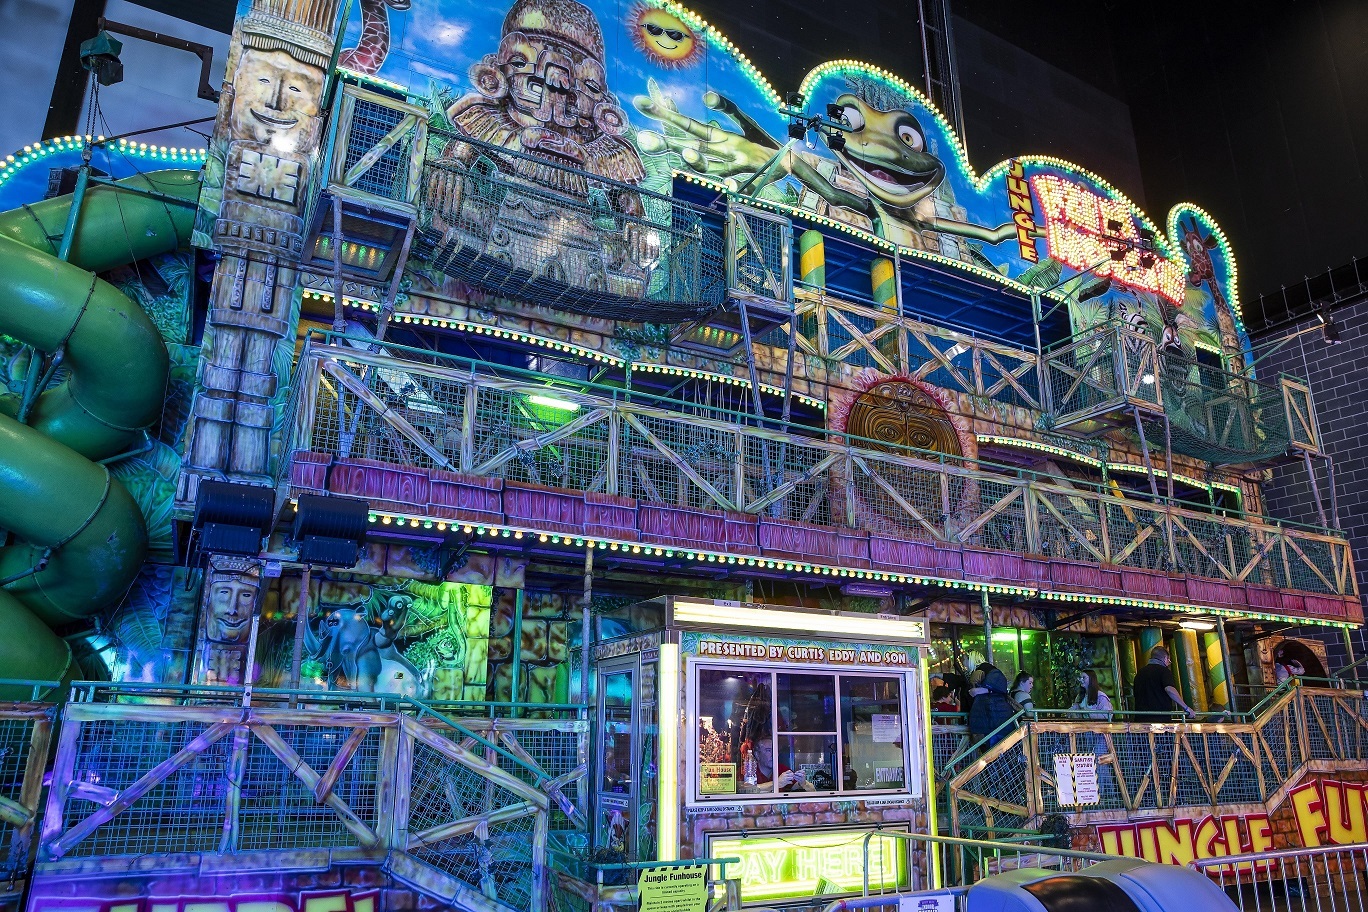 Kids can go on the UK’s largest travelling funhouse